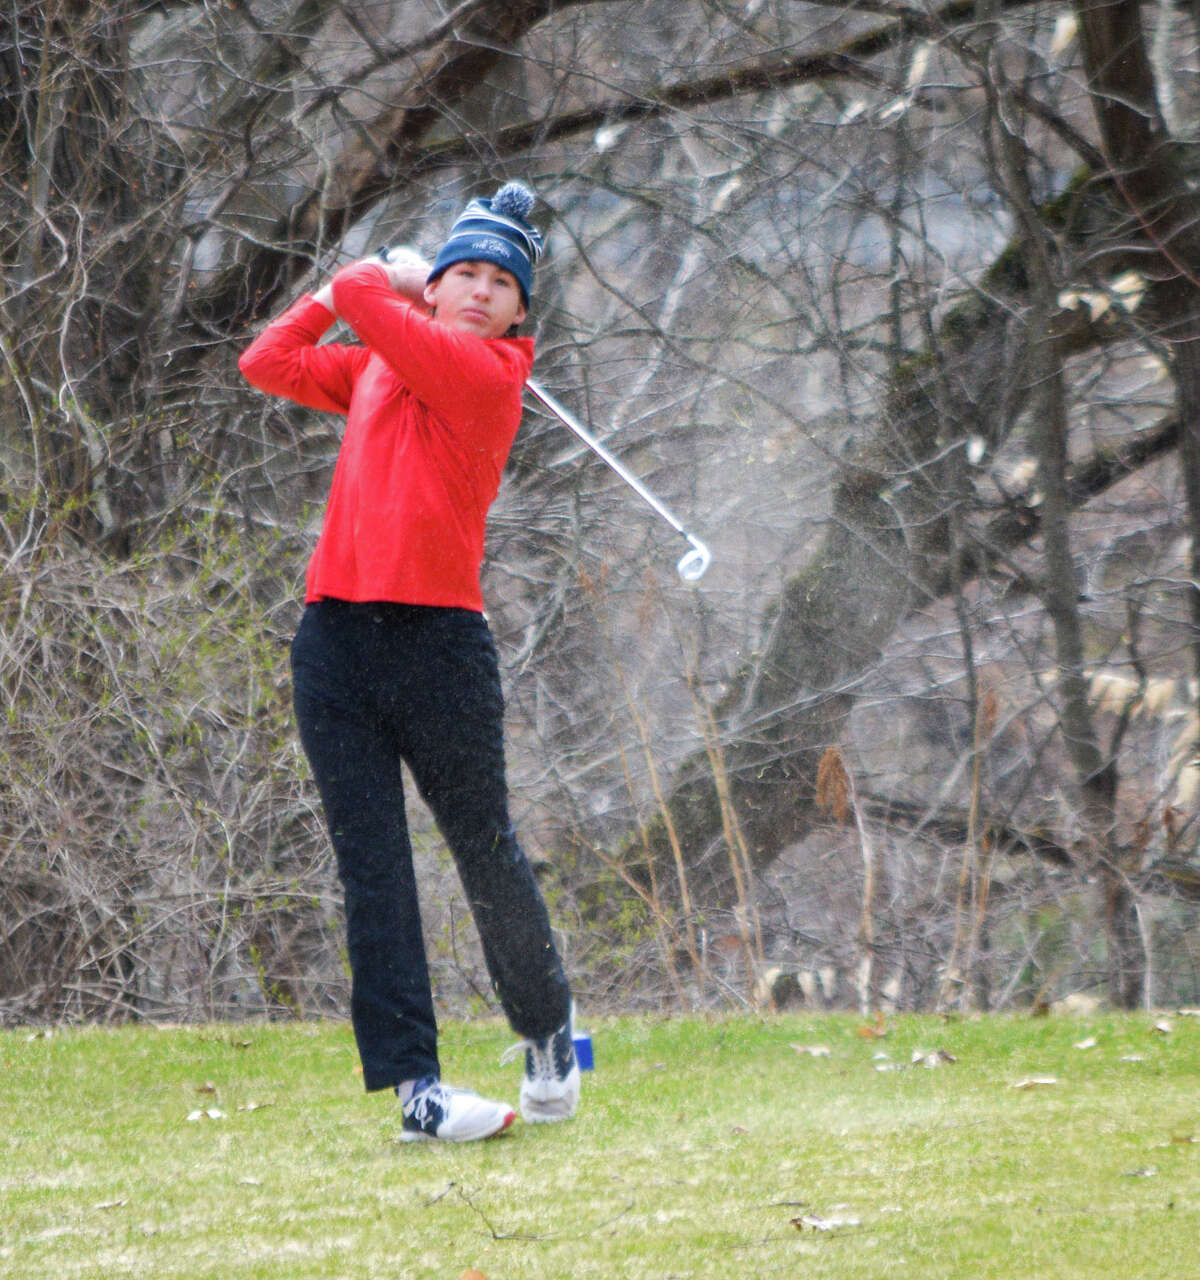 Big Rapids' Luke Welch tees off on the par 3 12th hole at Tri County on Wednesday.